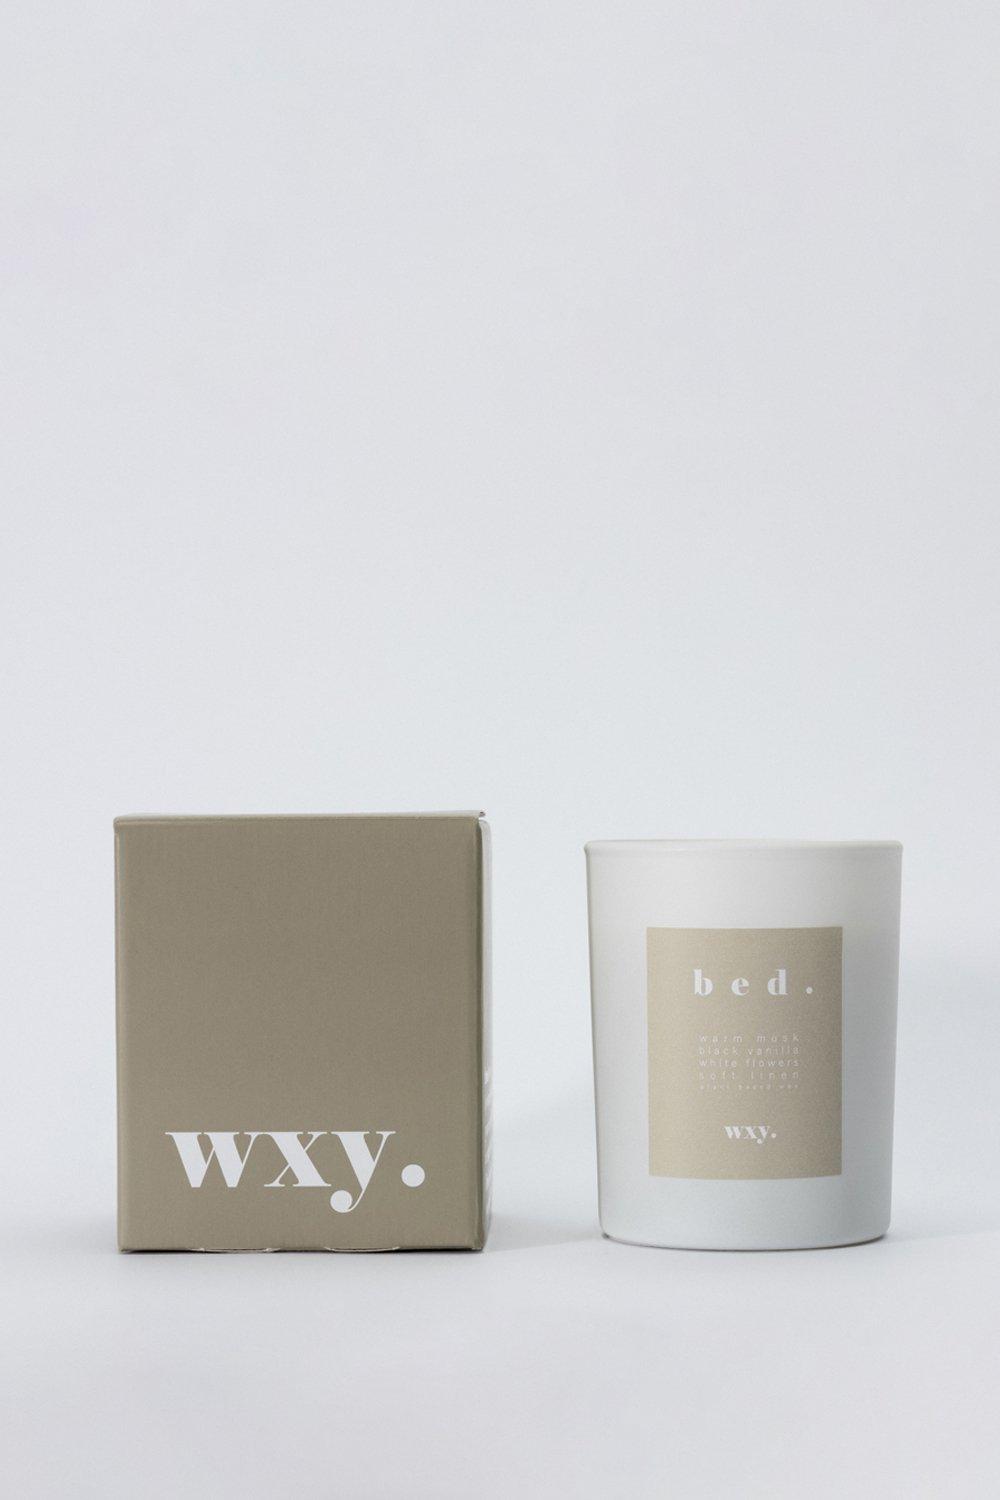 product image of Bed - Warm Musk & Black Vanilla Candle